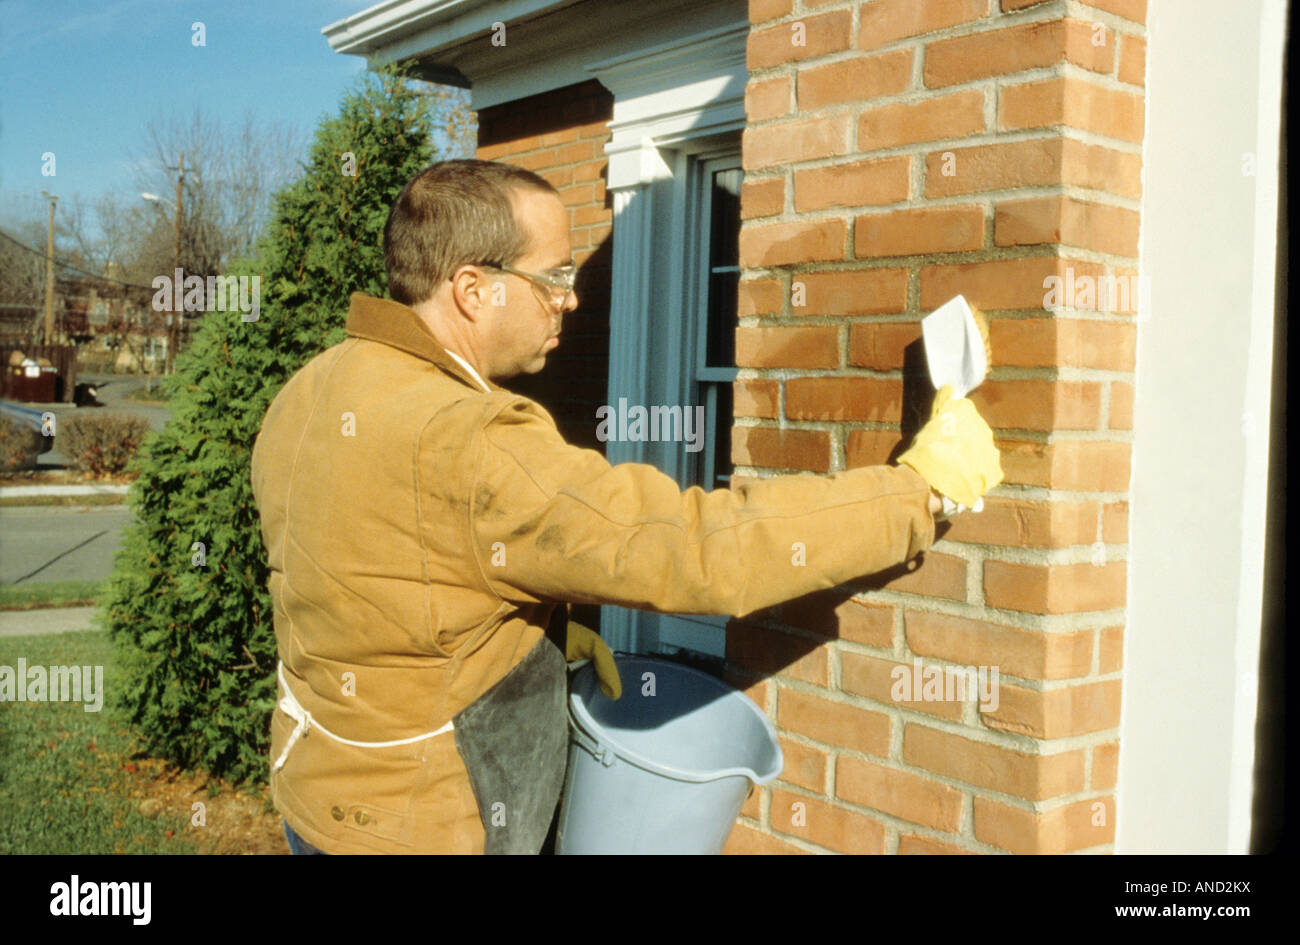 Muriatic acid being used to clean brick mortar, chemical reaction, safety gear goggles gloves, science chemistry Maryland USA Stock Photo